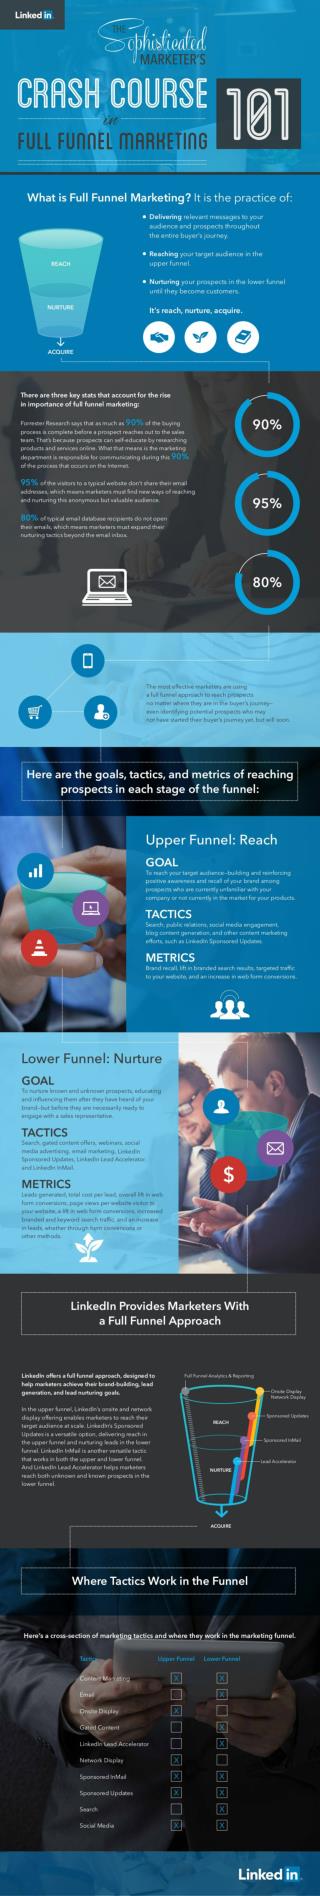 A sophisticated Marketer's Crash Course in Full Funnel Marketing - 101- INFOGRAPHIC